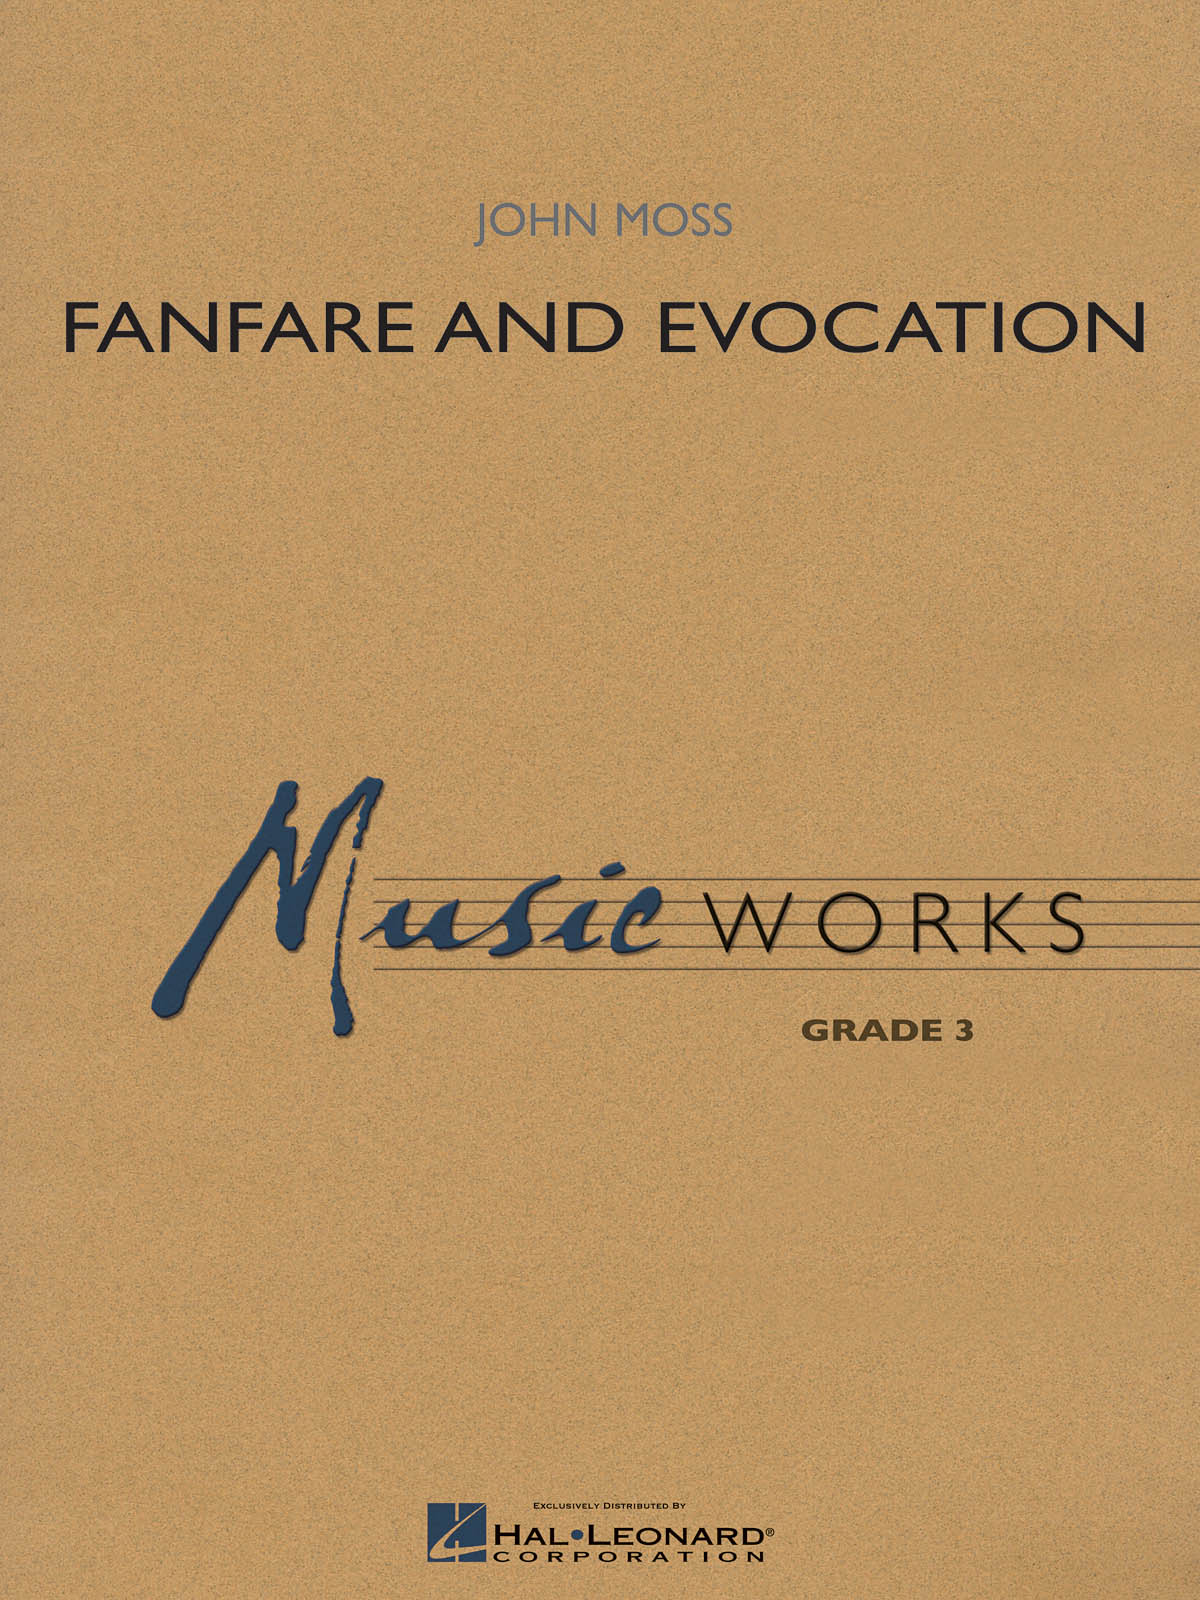 Fanfare And Evocation